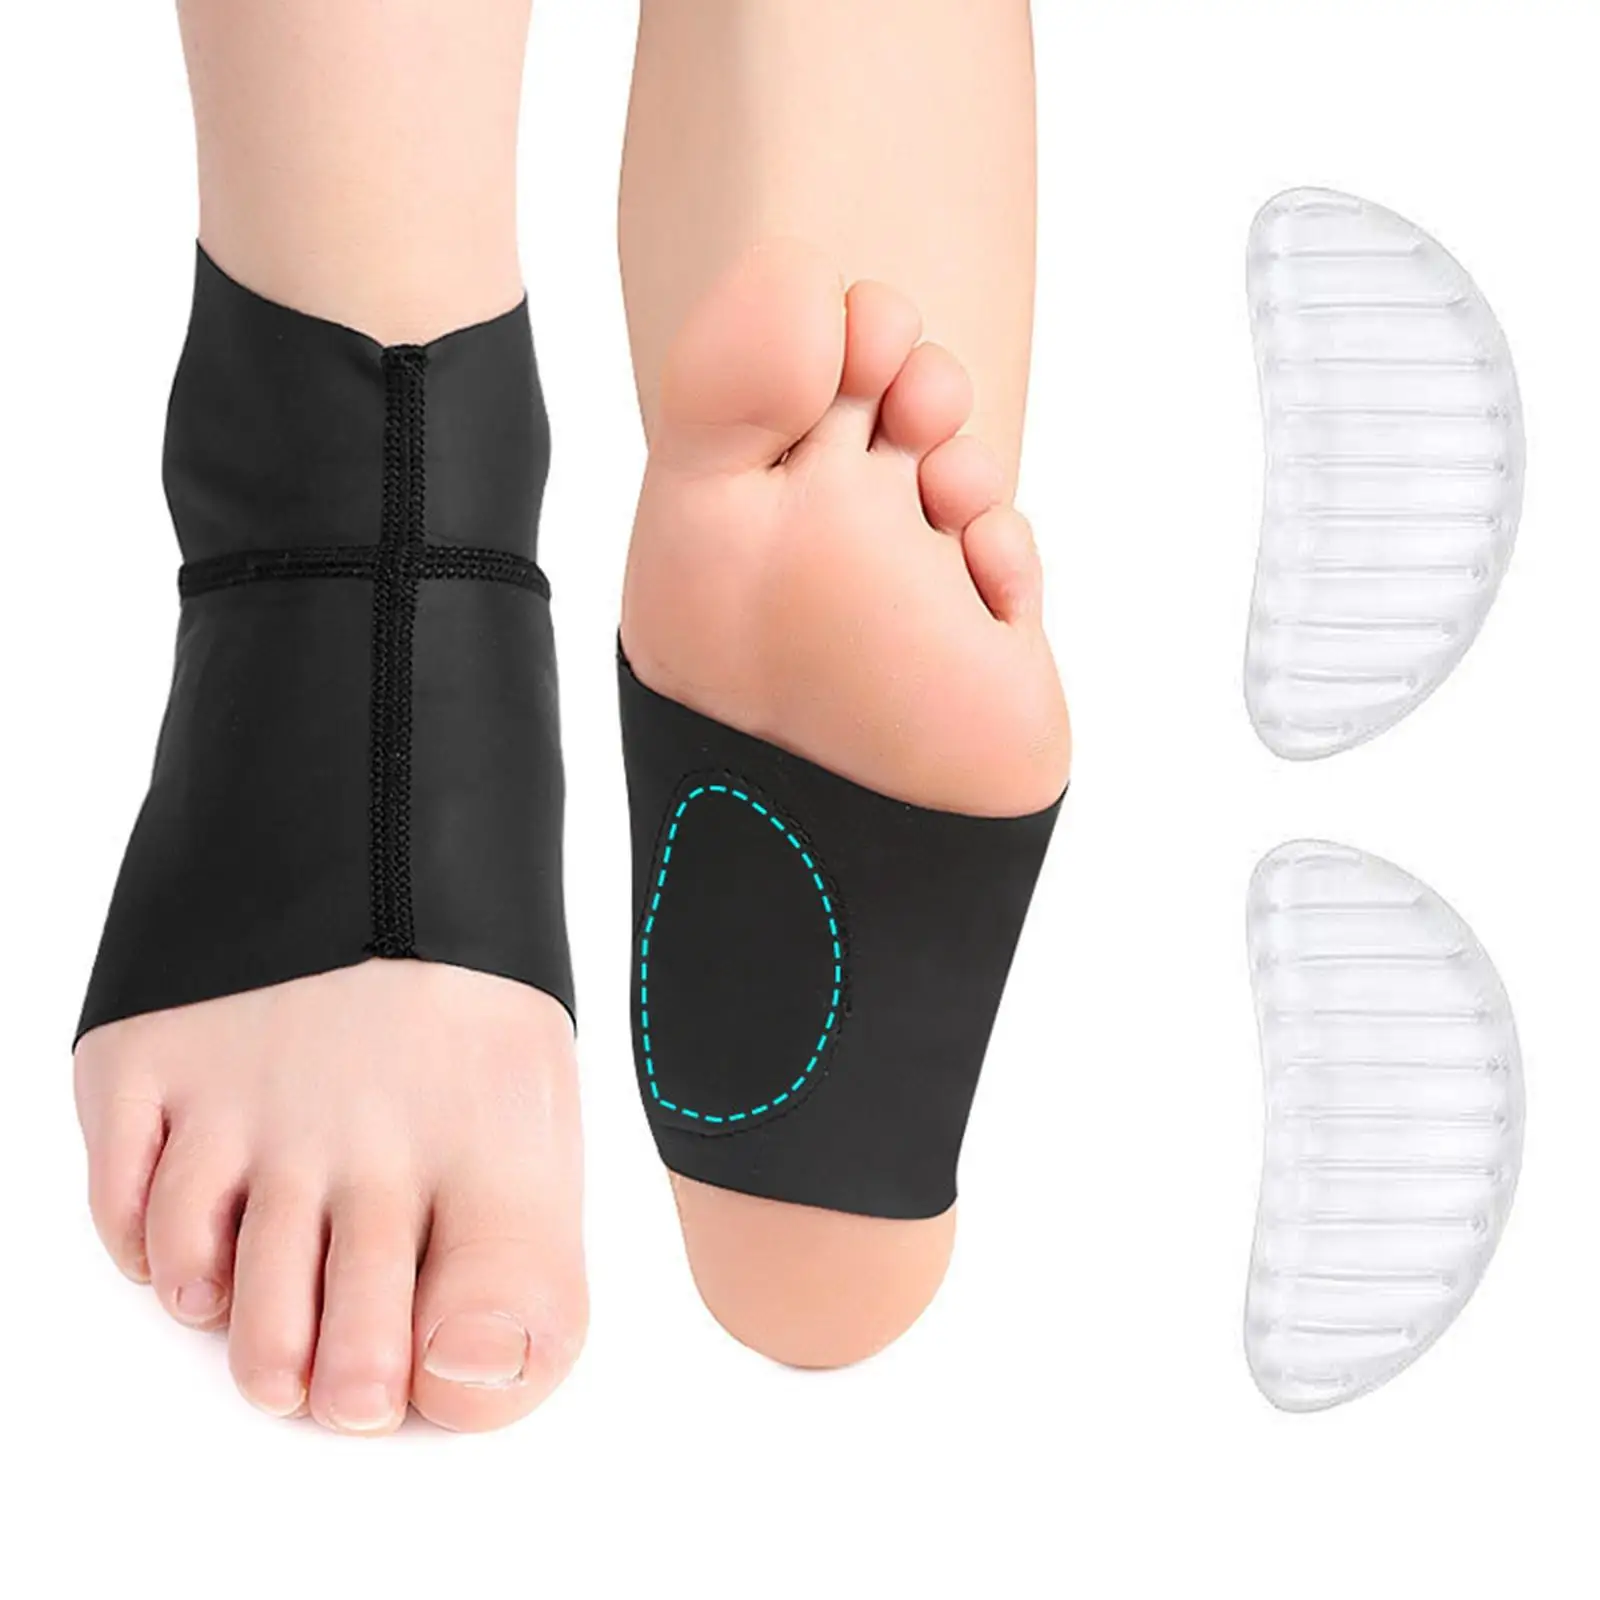 2x Arch Support Foot Pad Breathable Ankle Support Brace Corrector for Sports